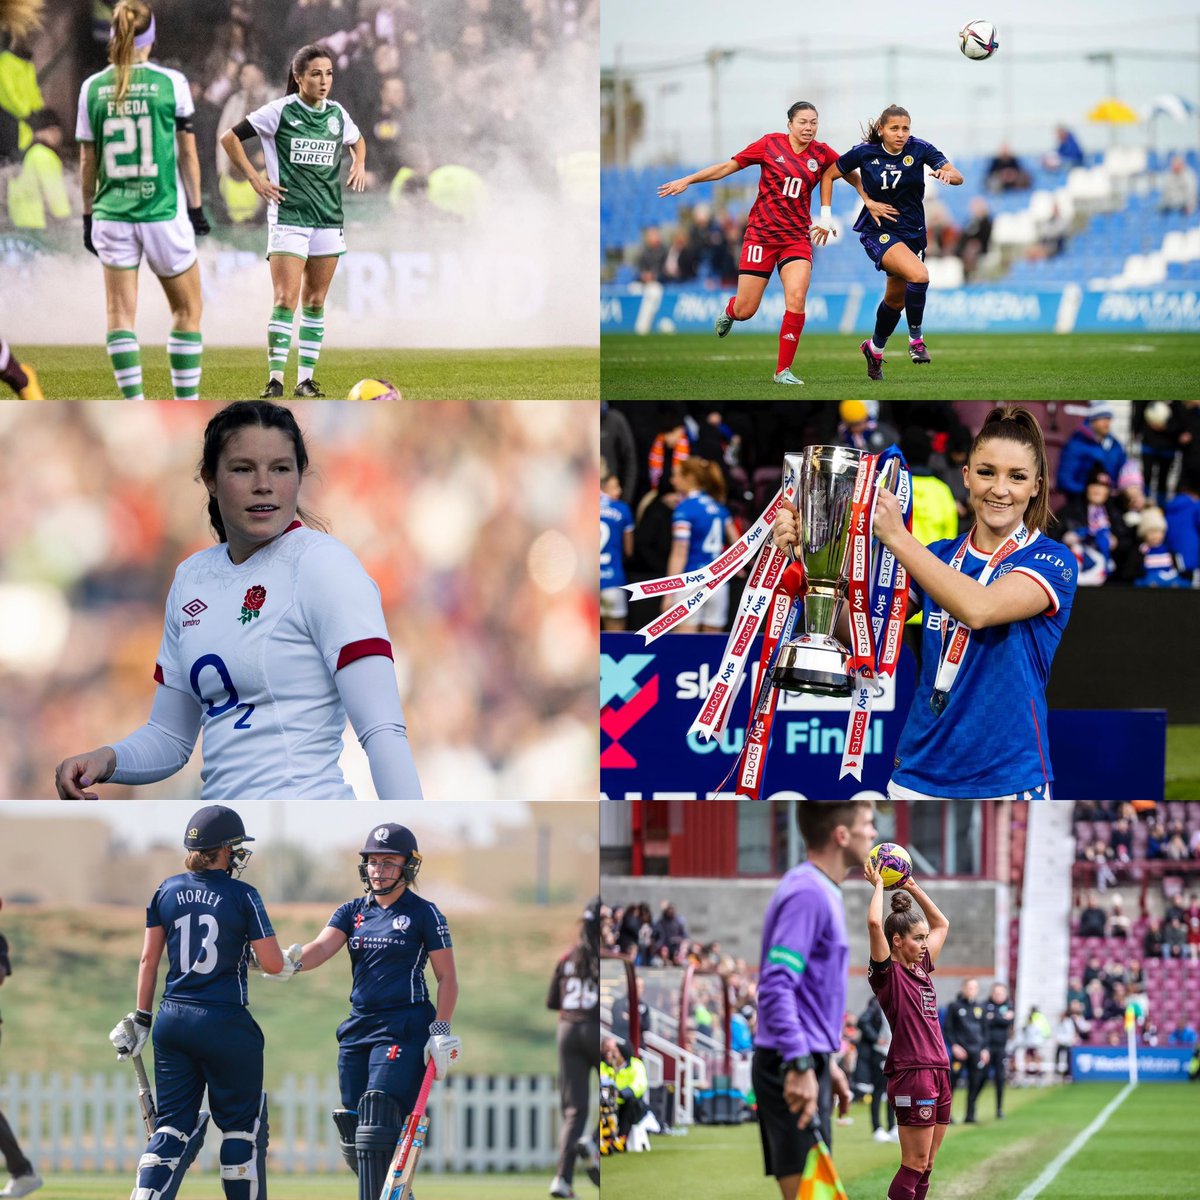 𝙃𝙖𝙥𝙥𝙮 𝙄𝙣𝙩𝙚𝙧𝙣𝙖𝙩𝙞𝙤𝙣𝙖𝙡 𝙒𝙤𝙢𝙚𝙣’𝙨 𝘿𝙖𝙮! Celebrating #IWD2023 with all our female clients who are inspiring the next generation ⚽️ 🏏 🏉 #LetGirlsPlay | #IWD2023